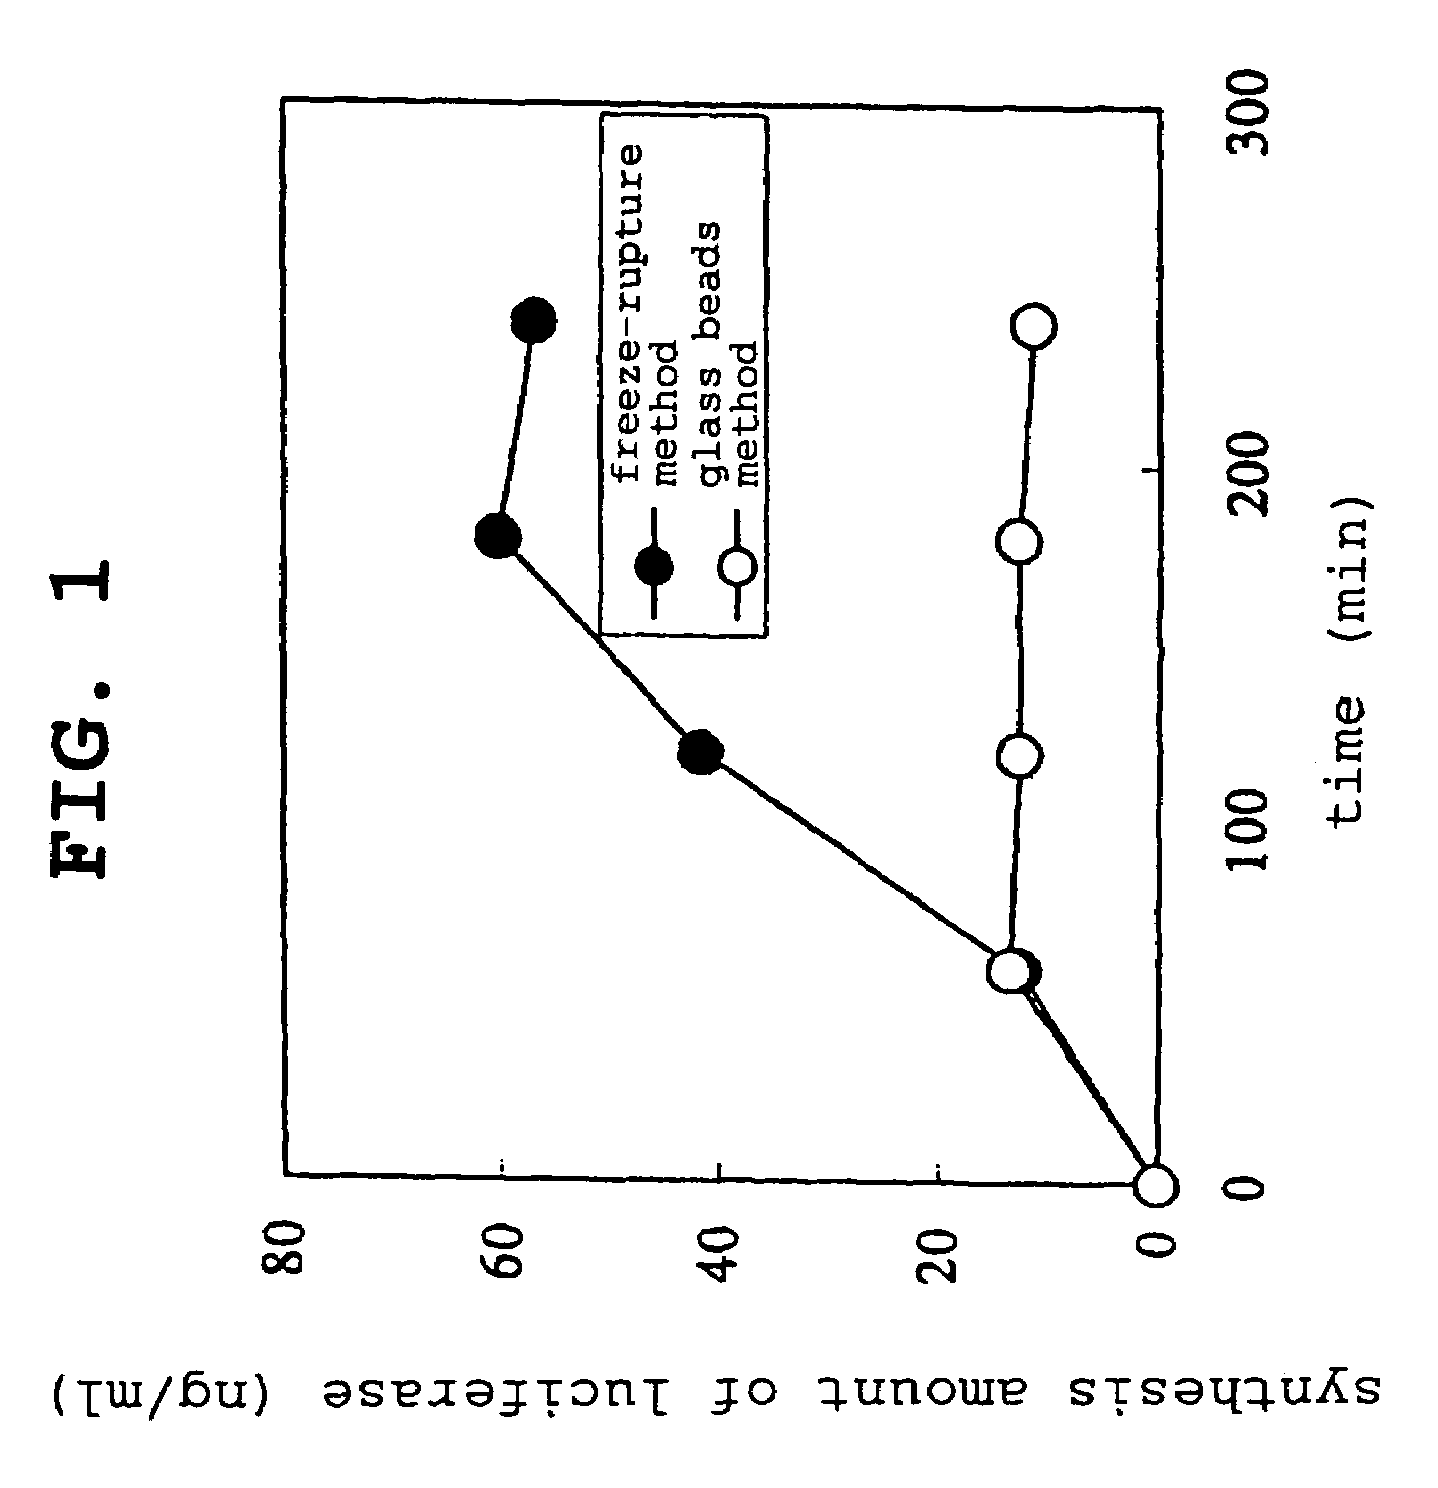 Yeast extract solution for cell-free protein synthesis, method for preparation thereof and method for cell-free protein synthesis using same